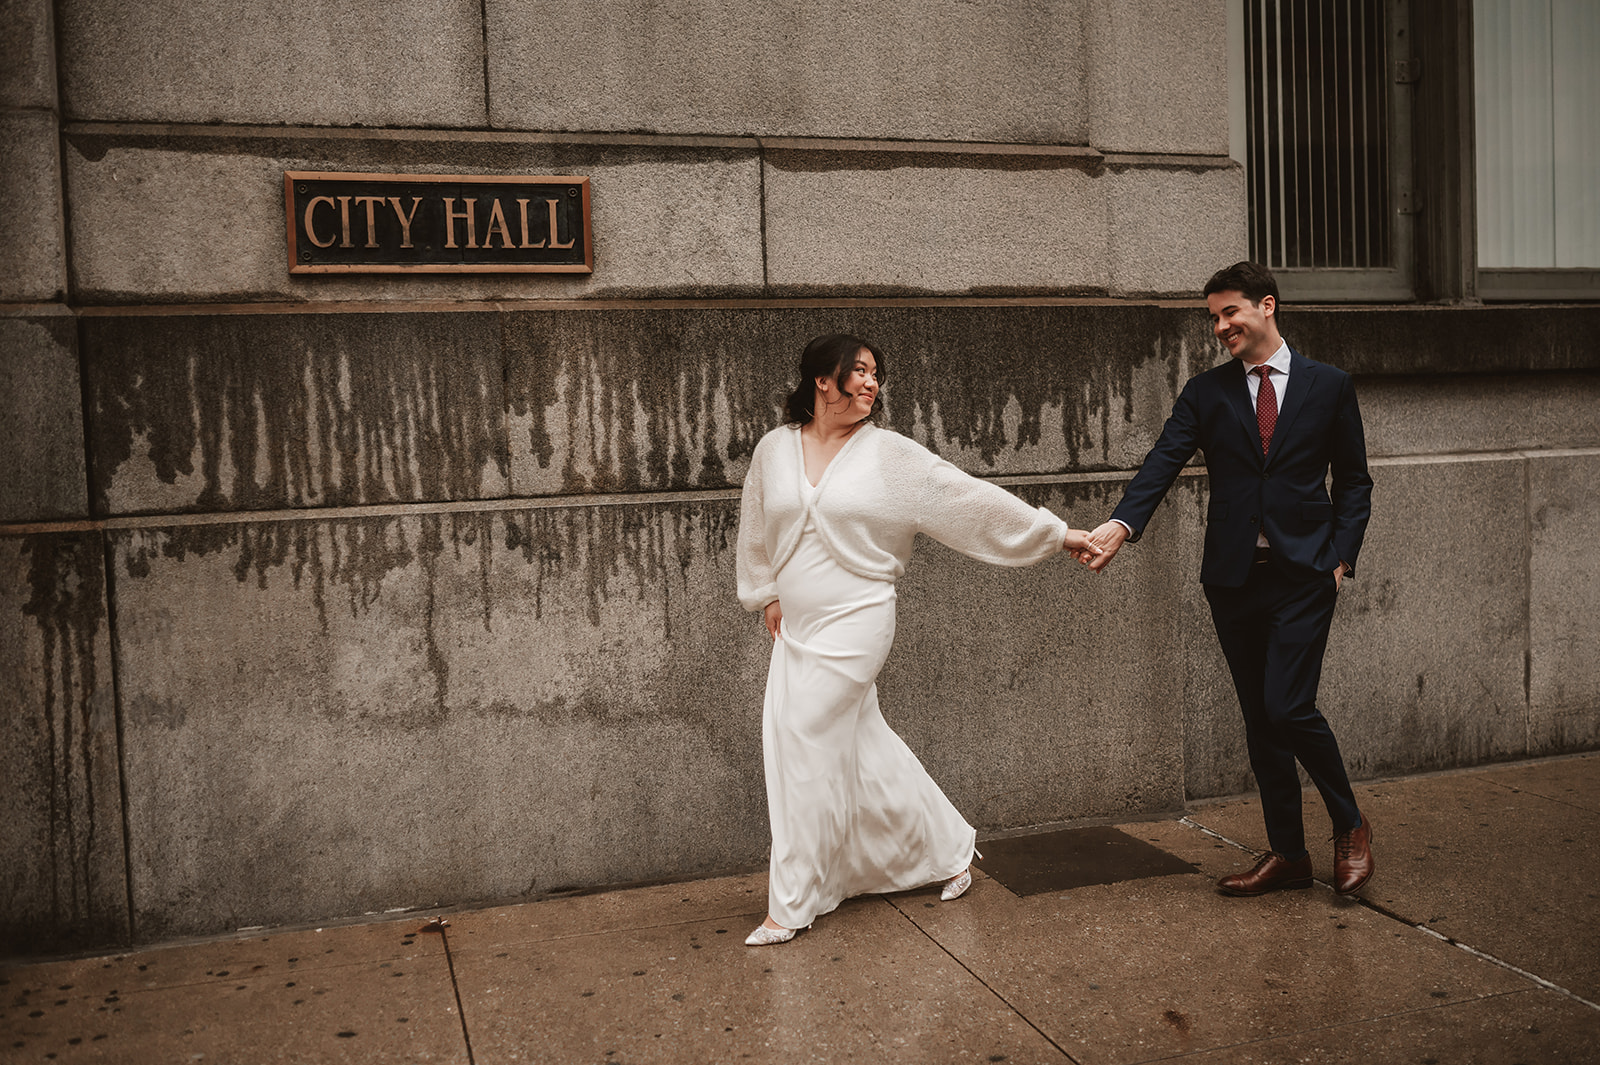 Intimate rainy day Chicago elopement wedding photography - in front of the city hall sign